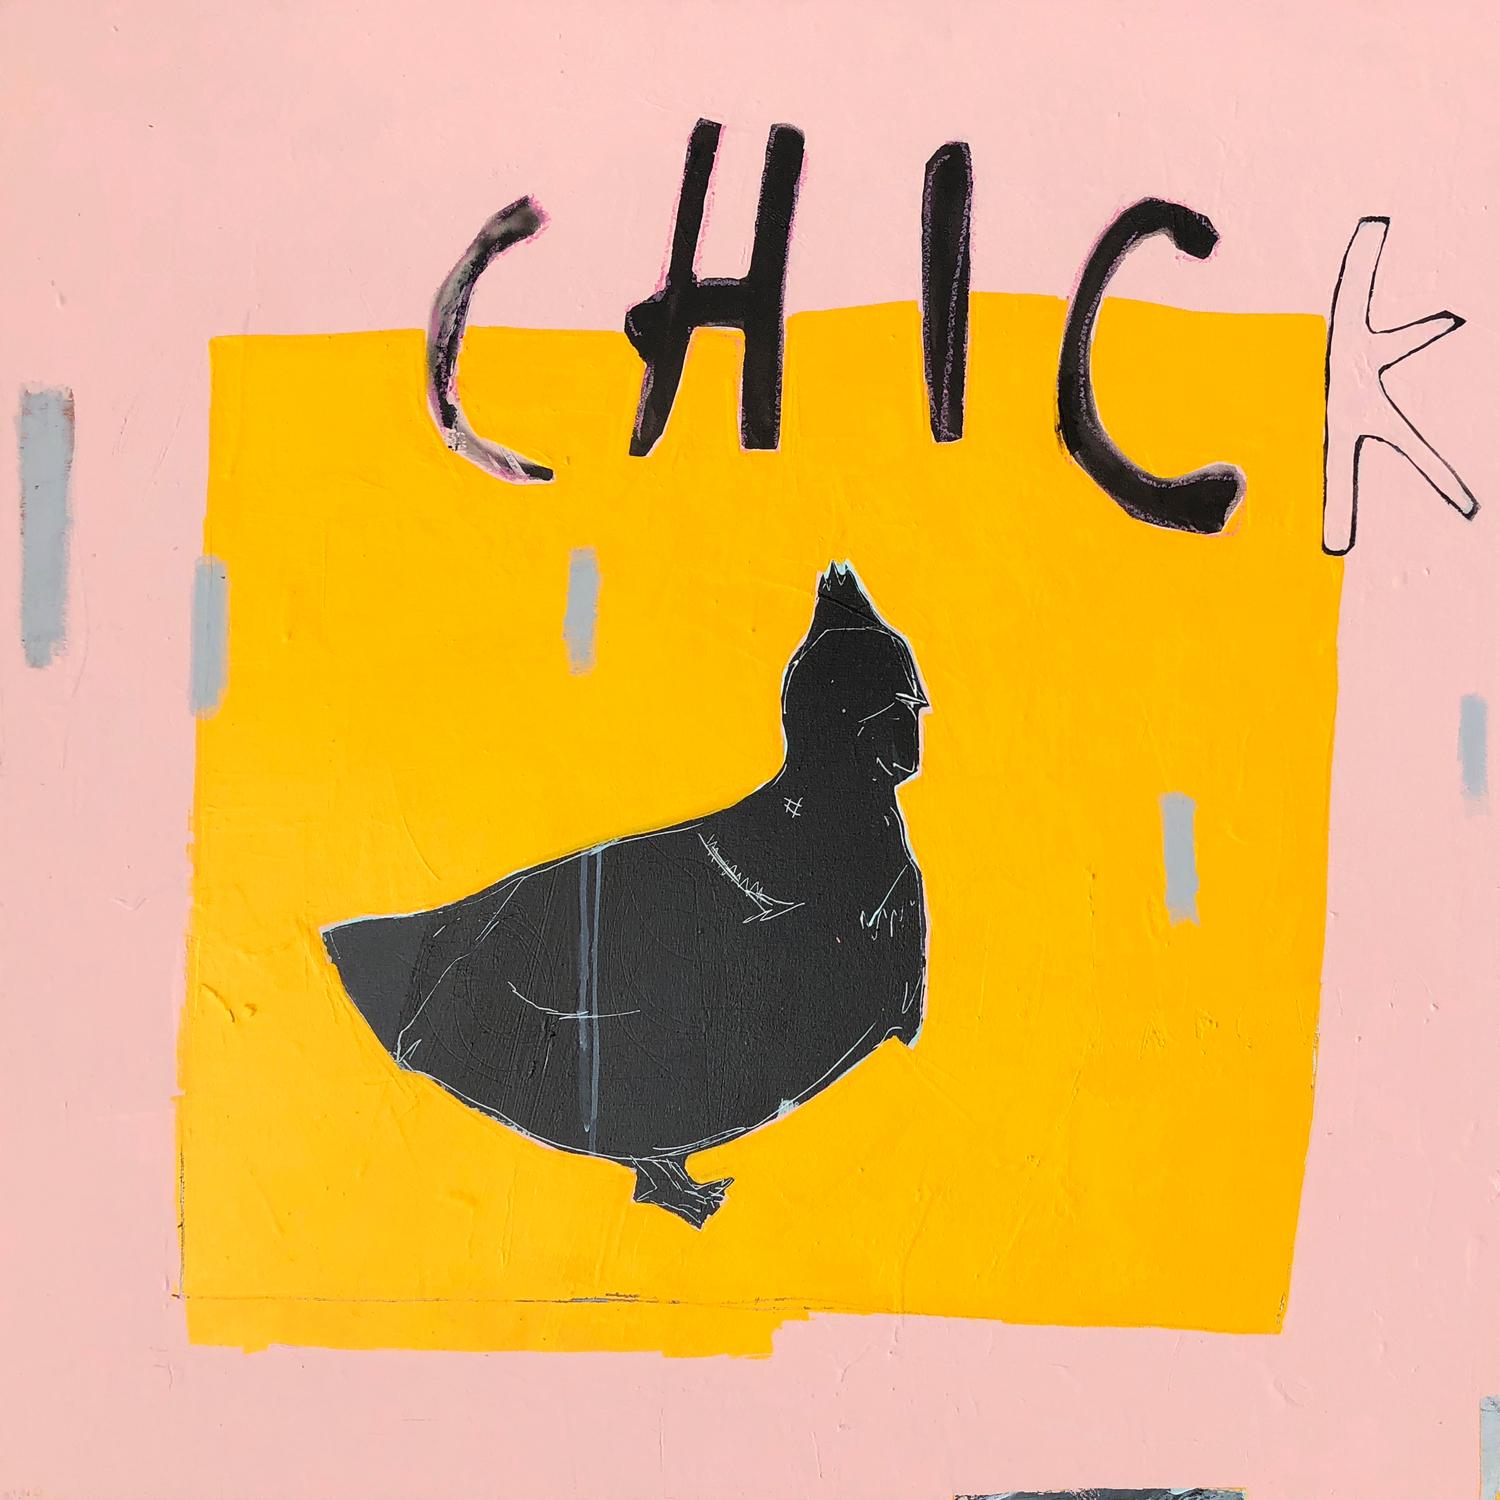 "Sidechick" by Gino Belassen is a unique acrylic on wood panel painting signed by the artist on the front. The original painting measures 36" H x 36" W. The artist painted the sides, and it does not require framing. There is a wire on the back for